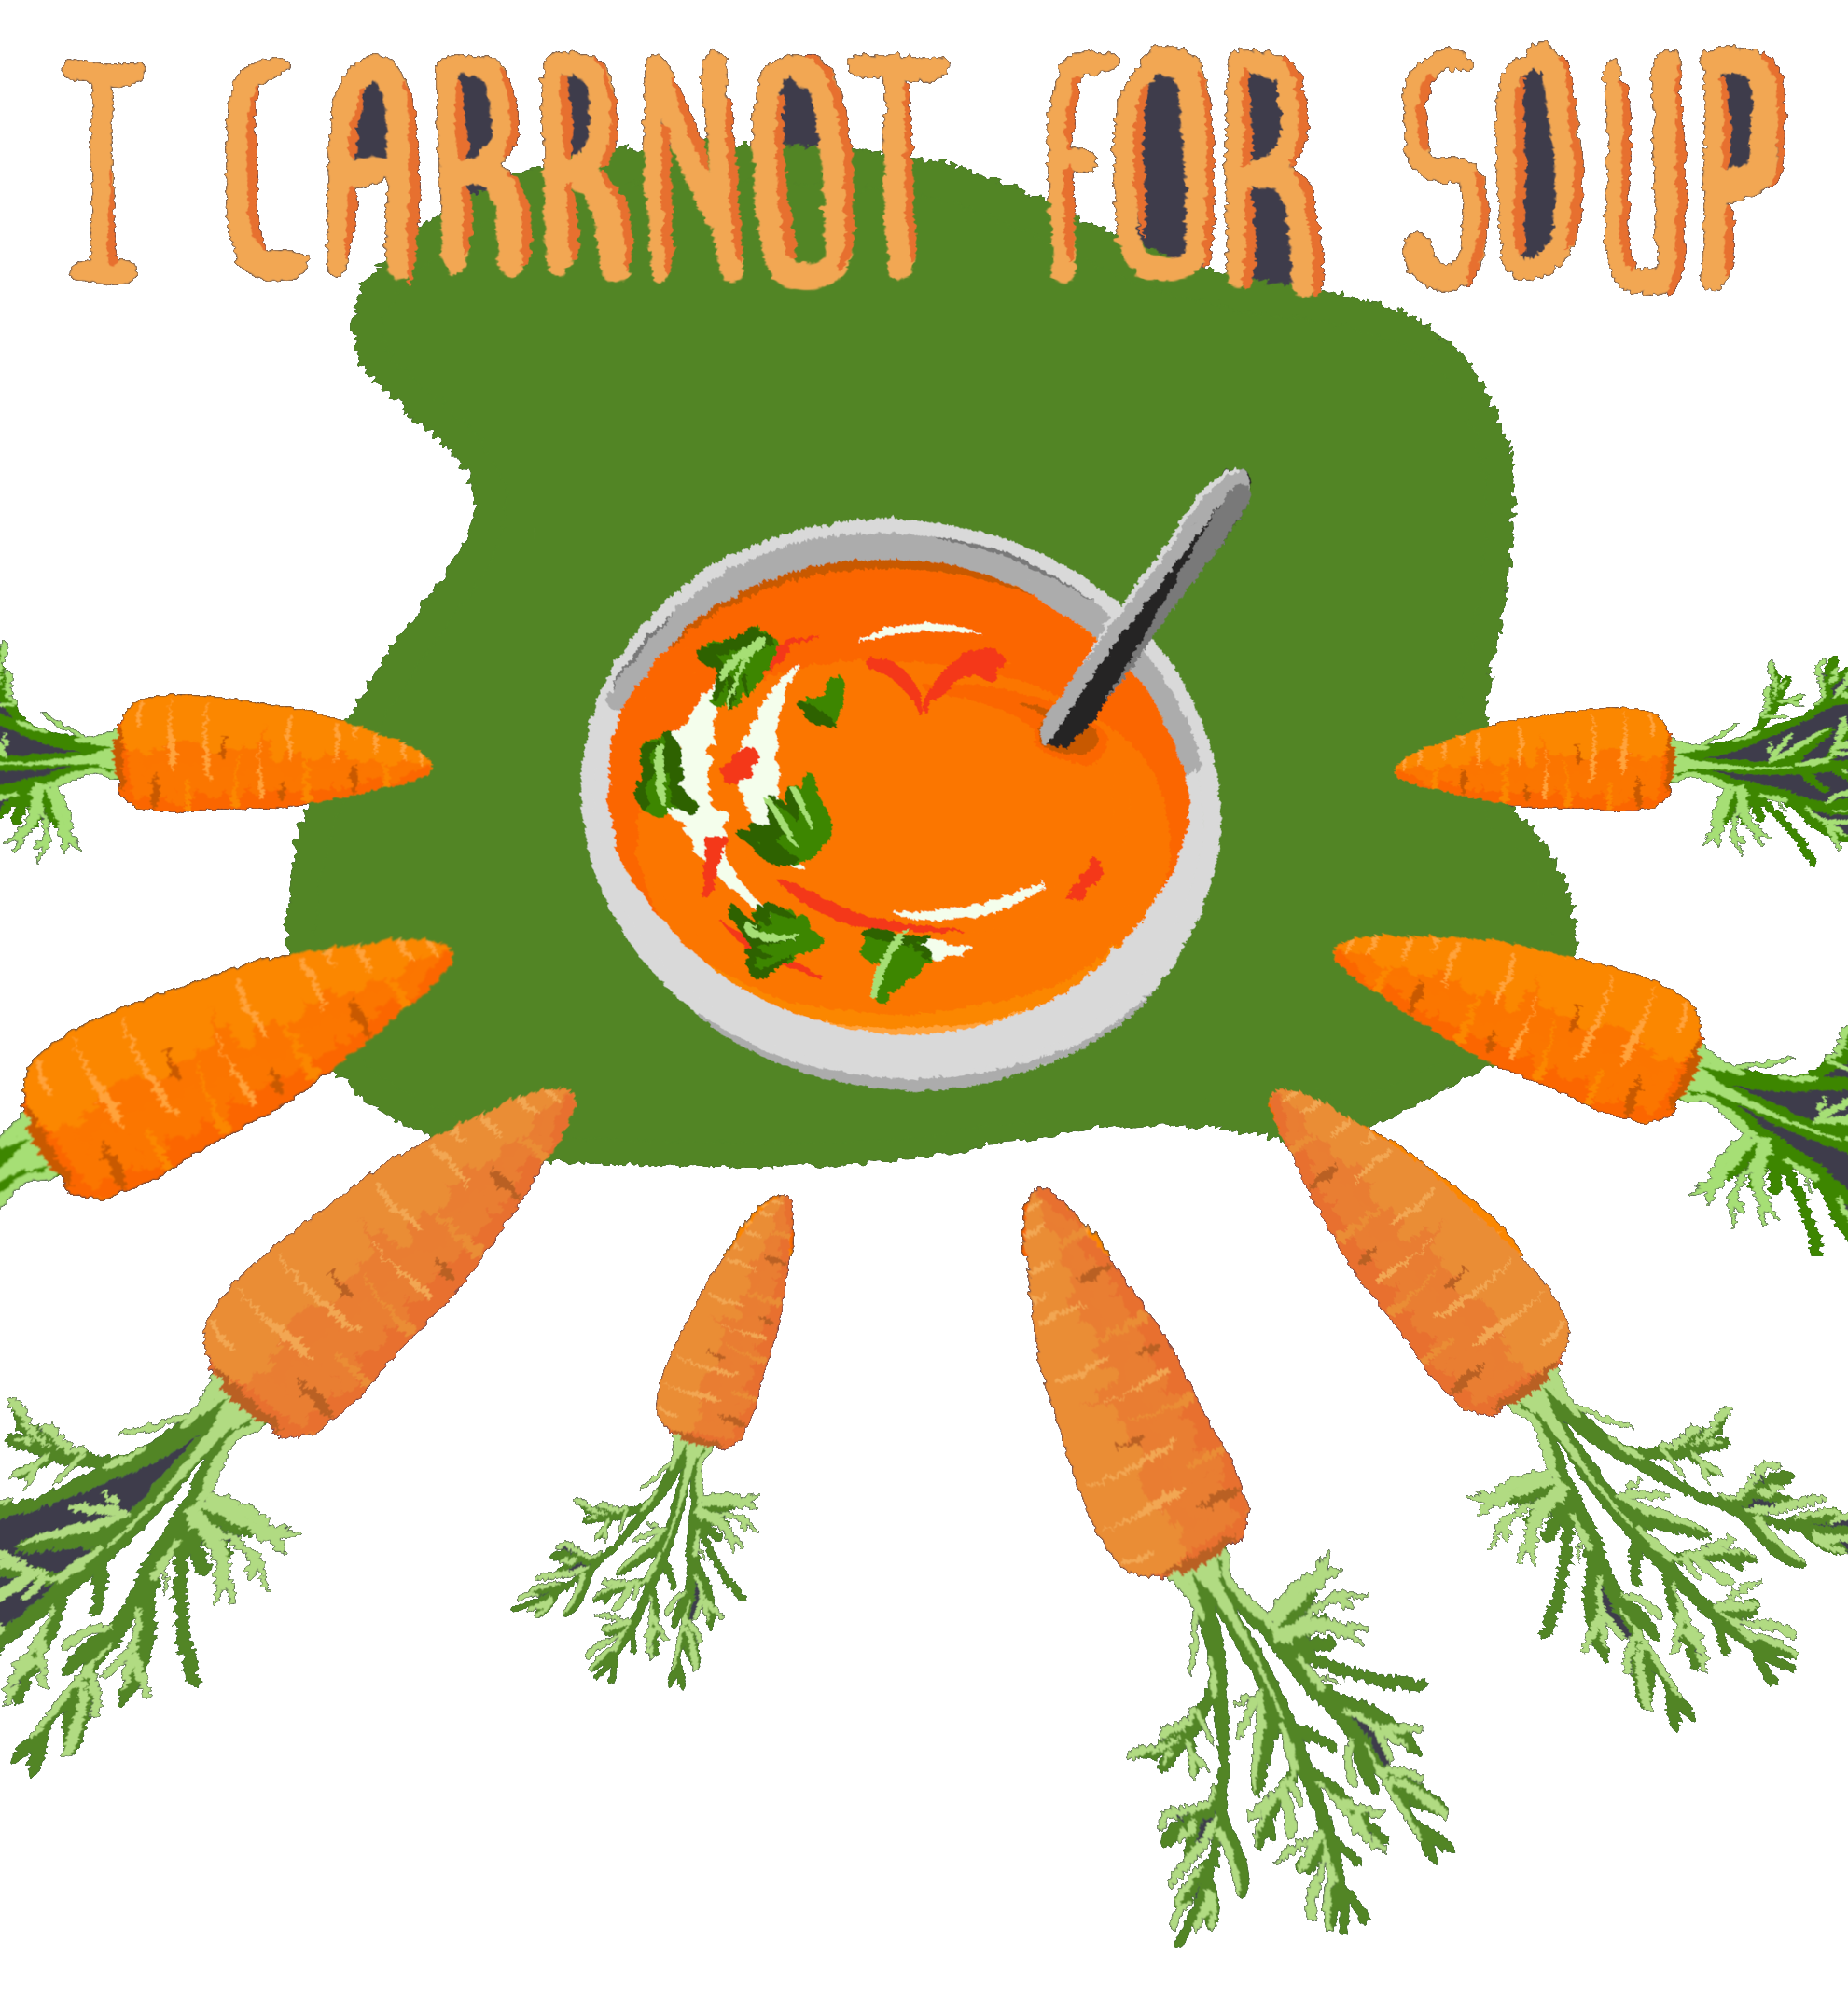 I CARRNOT FOR SOUP